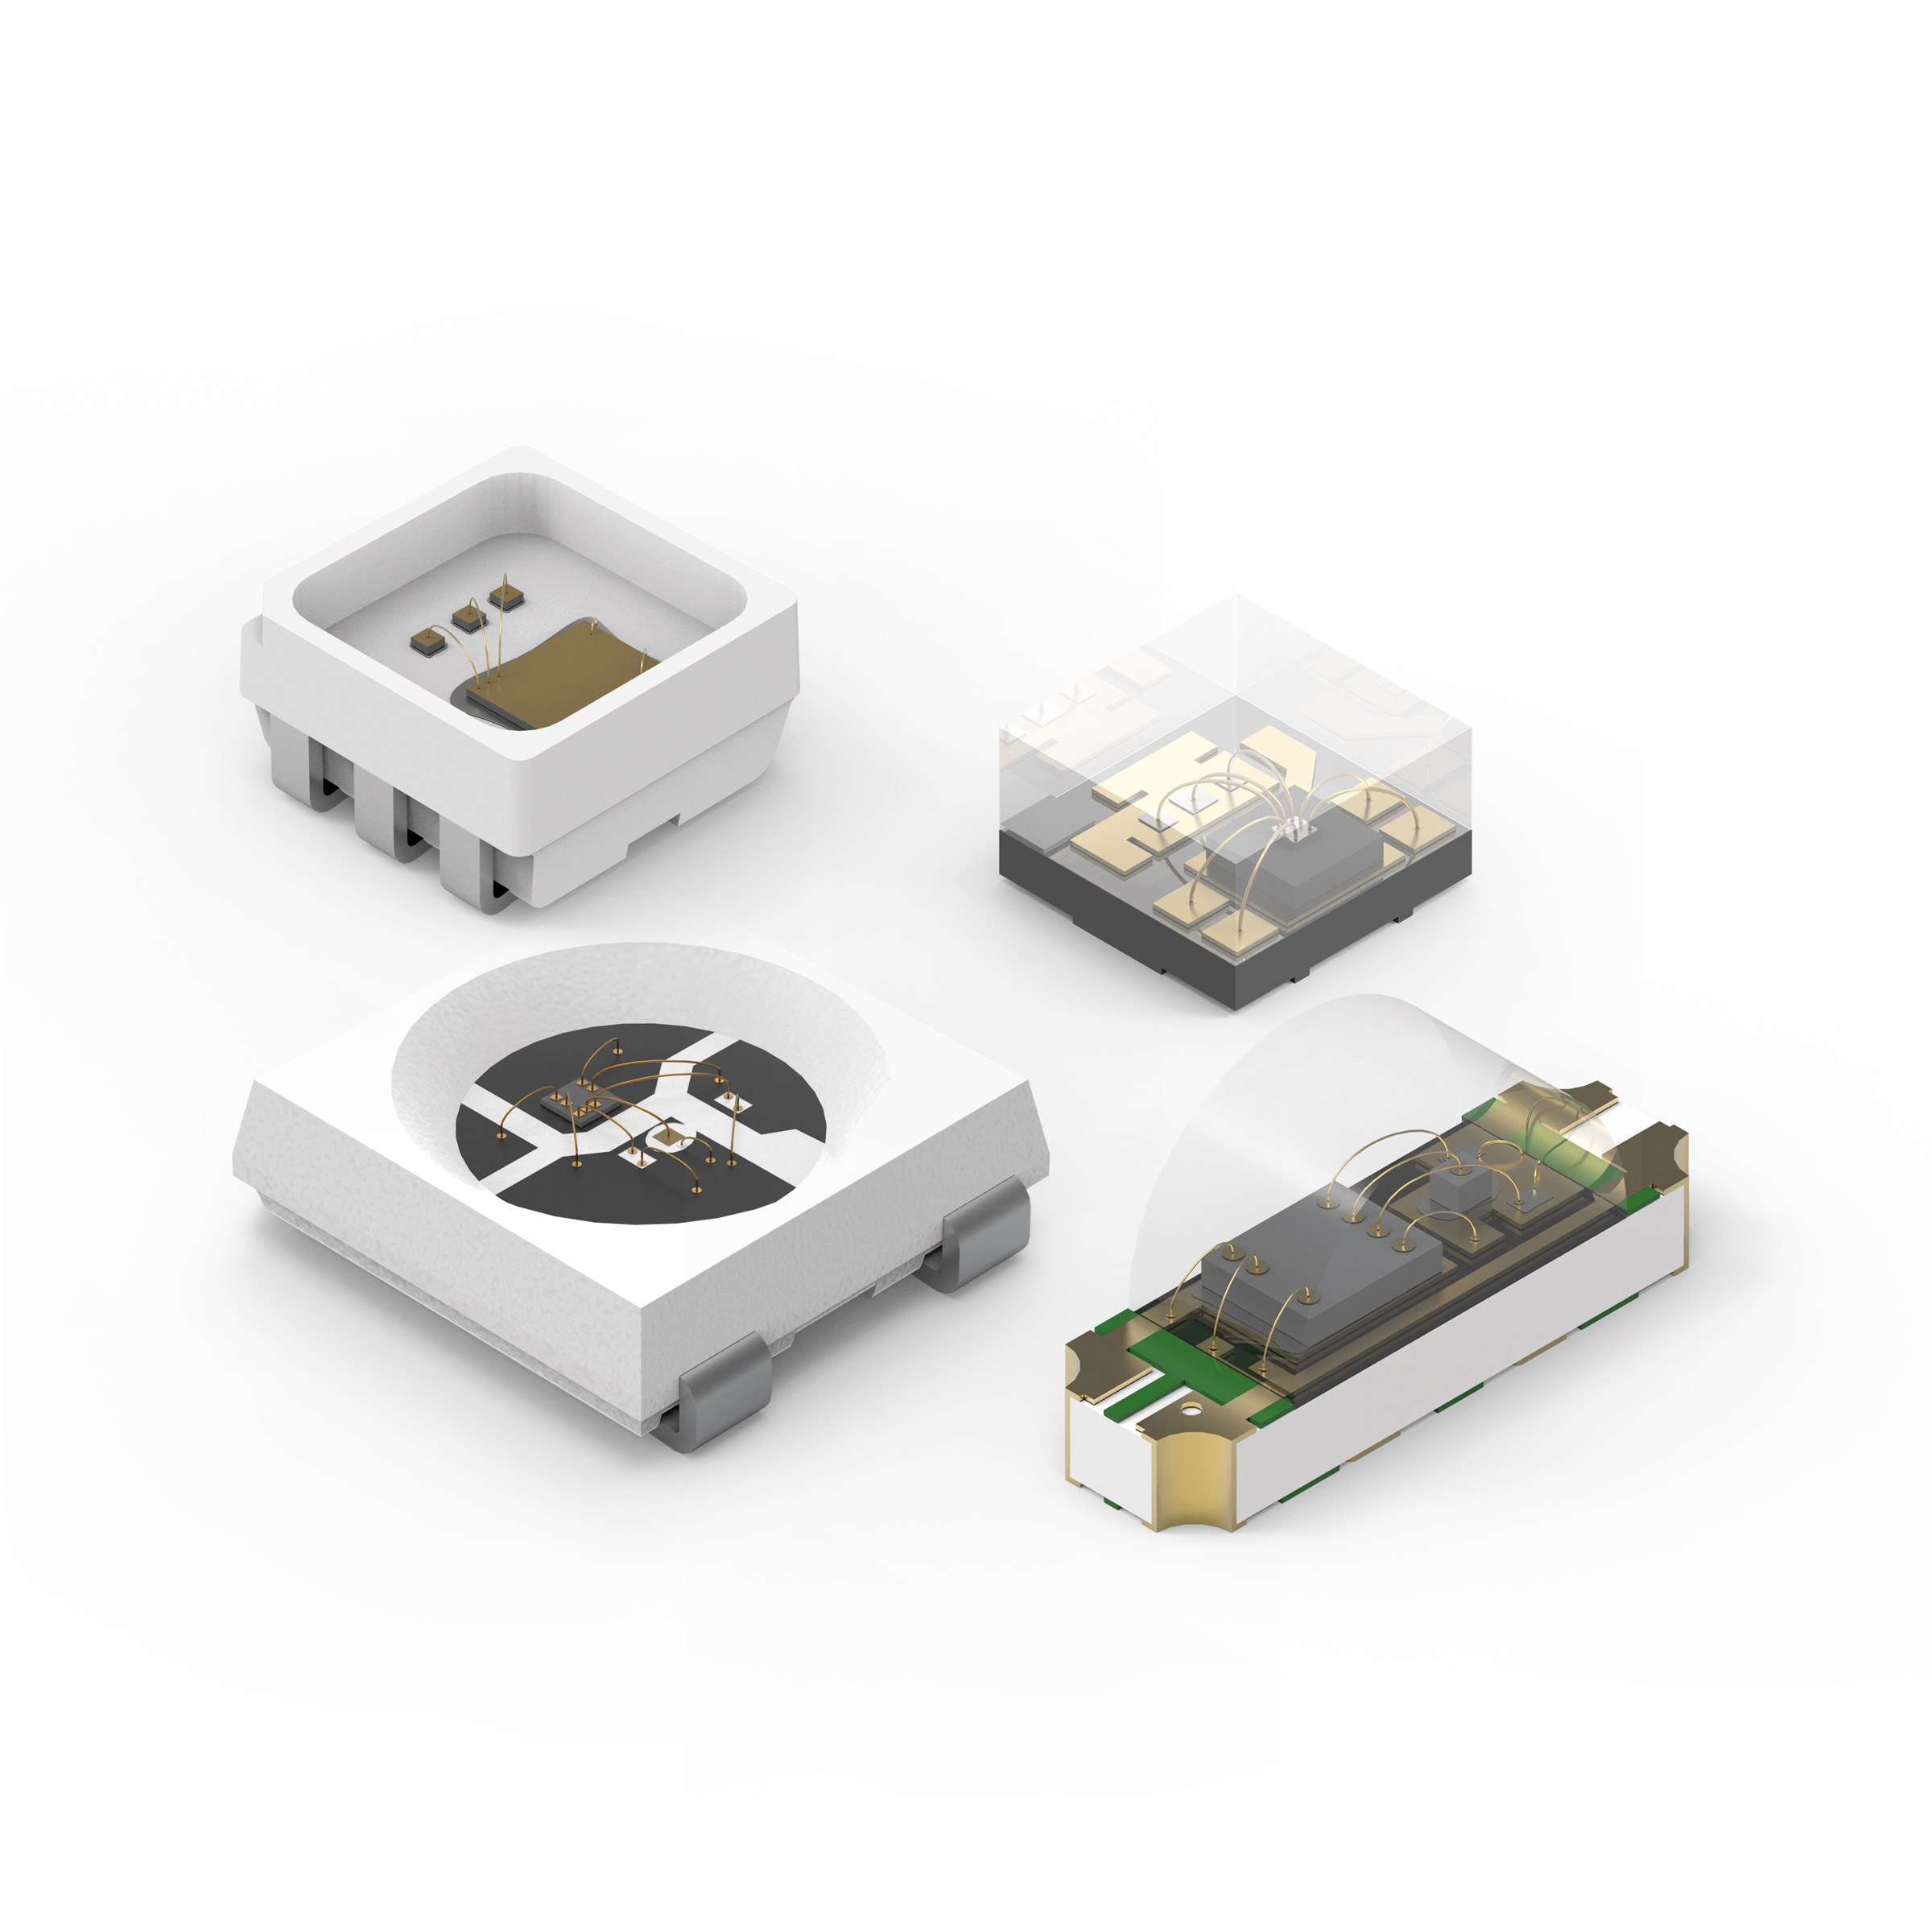 Würth Elektronik Presents LEDs with Integrated Controllers